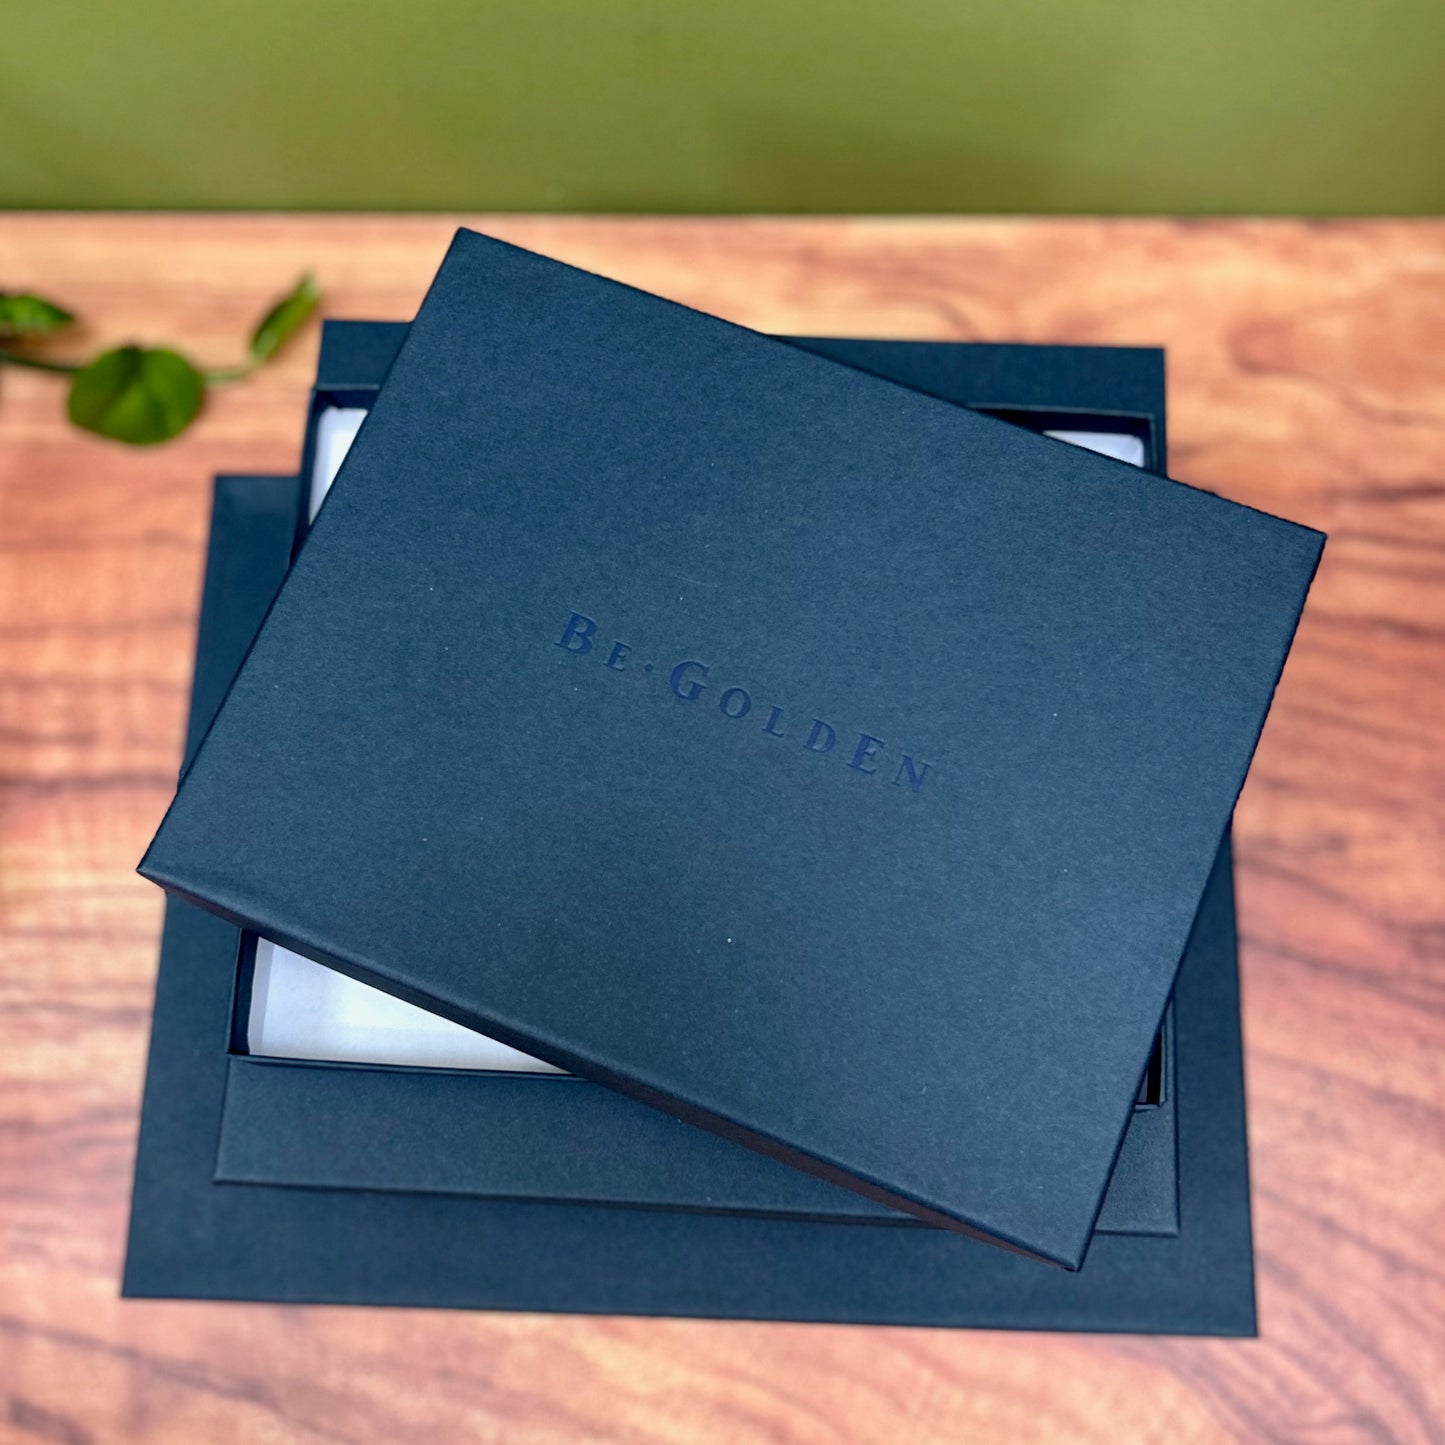 a pile of navy blue presentation boxes are sitting on a wooden table. You can see that they have been stamped with the name begolden on the front